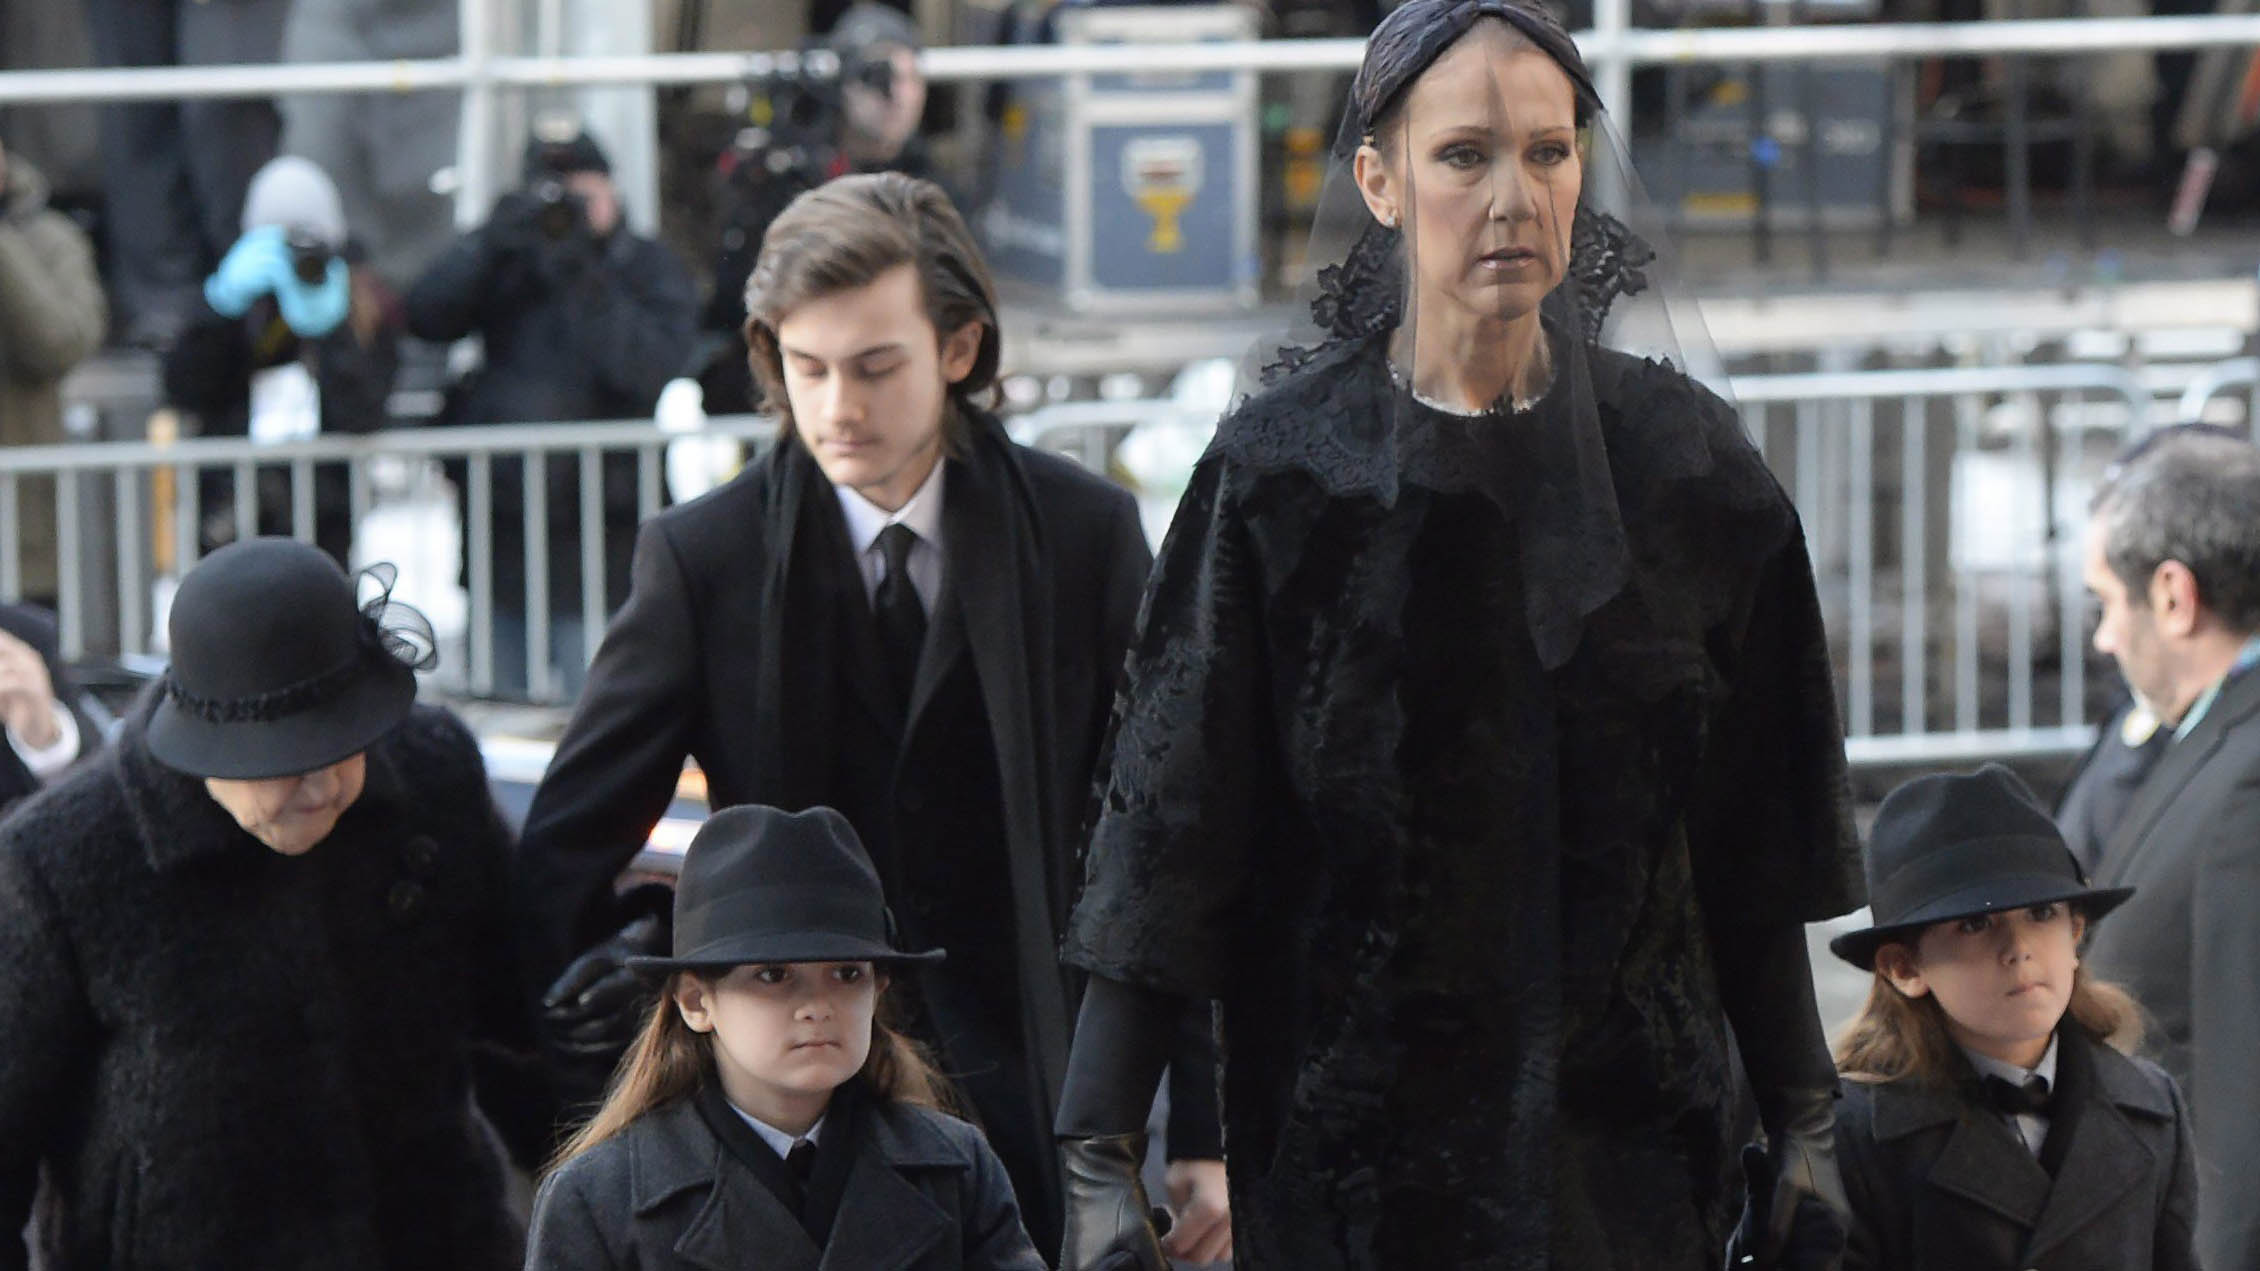 Celine Dion arrives with sons Eddy and Nelson at Montreal's Notre-Dame Basilica on Friday, January 22, 2016 for the funeral of her late husband Rene Angelil, who died of throat cancer last week at the age of 73. THE CANADIAN PRESS/Ryan Remiorz